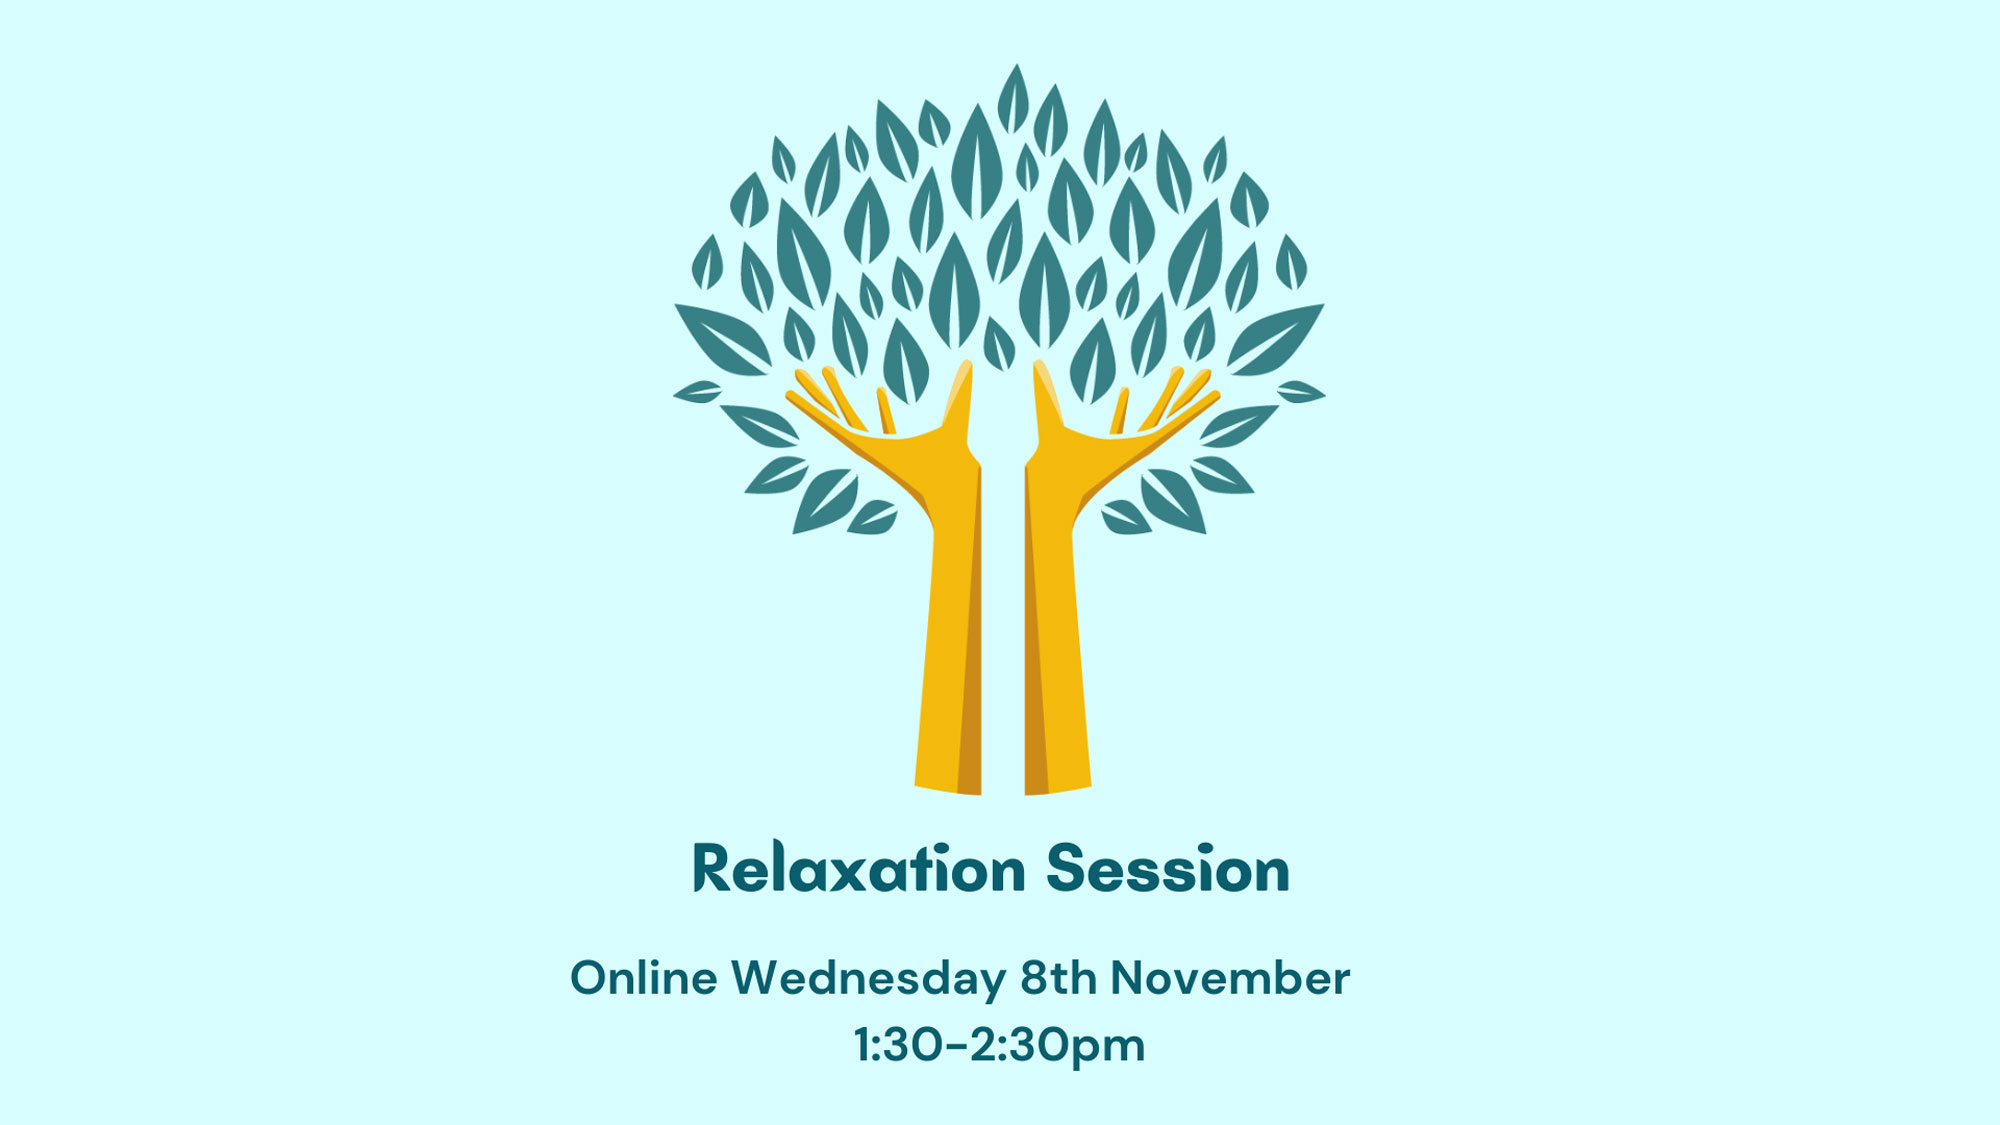 Wellbeing: Relaxation session